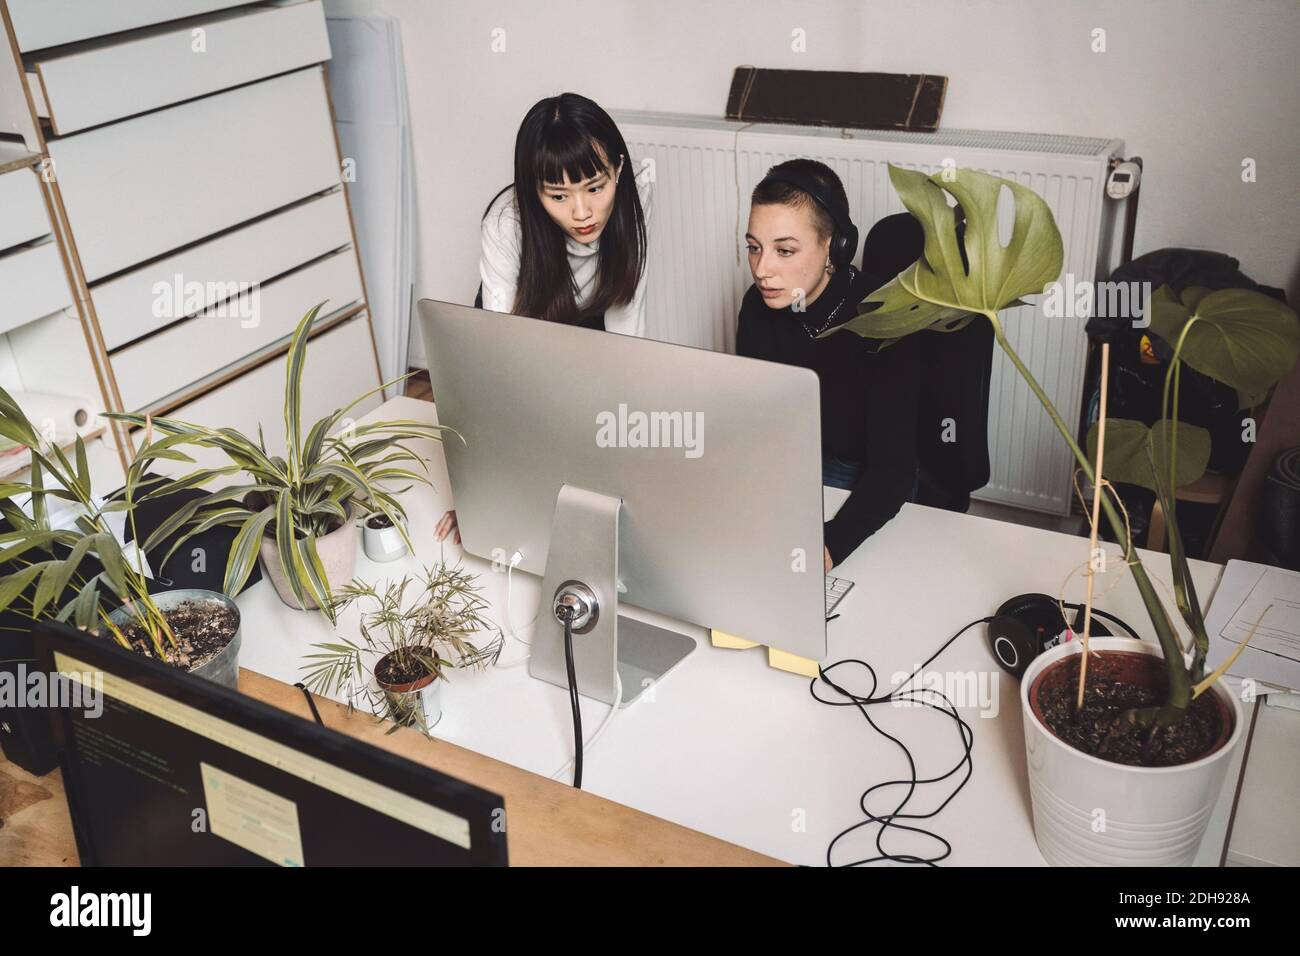 Businesswomen working on computer at place of work Stock Photo